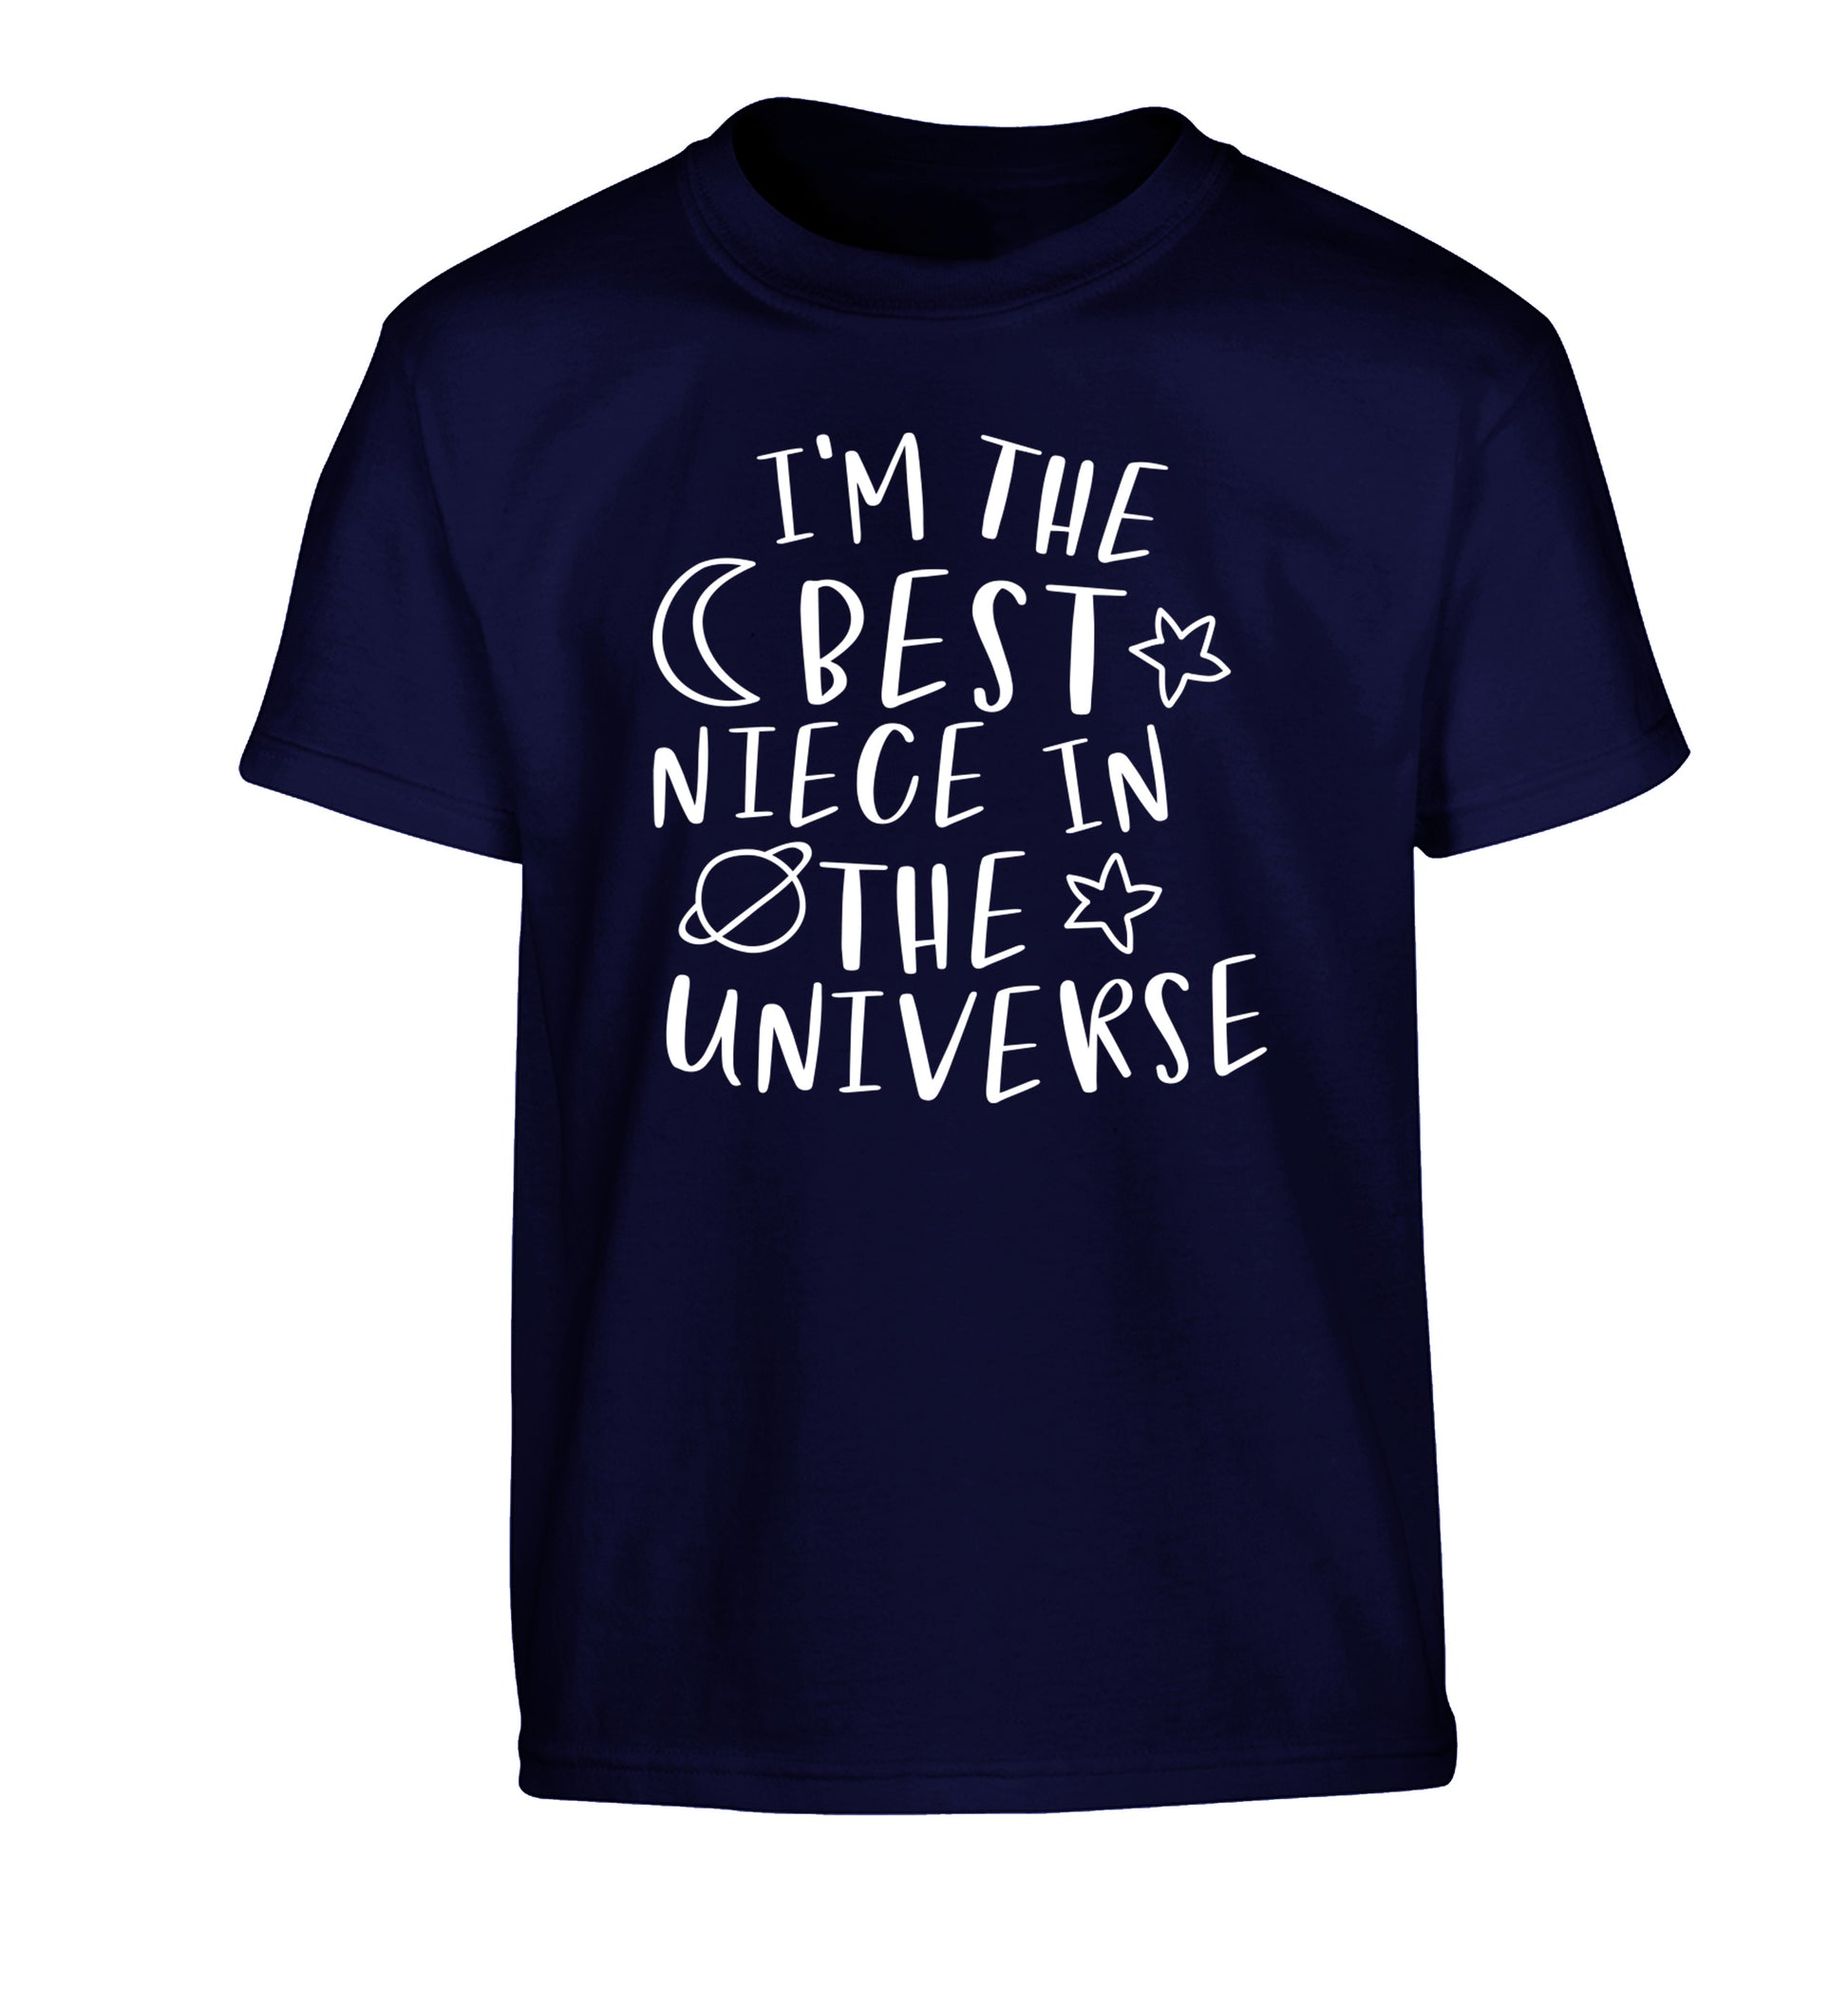 I'm the best niece in the universe Children's navy Tshirt 12-13 Years